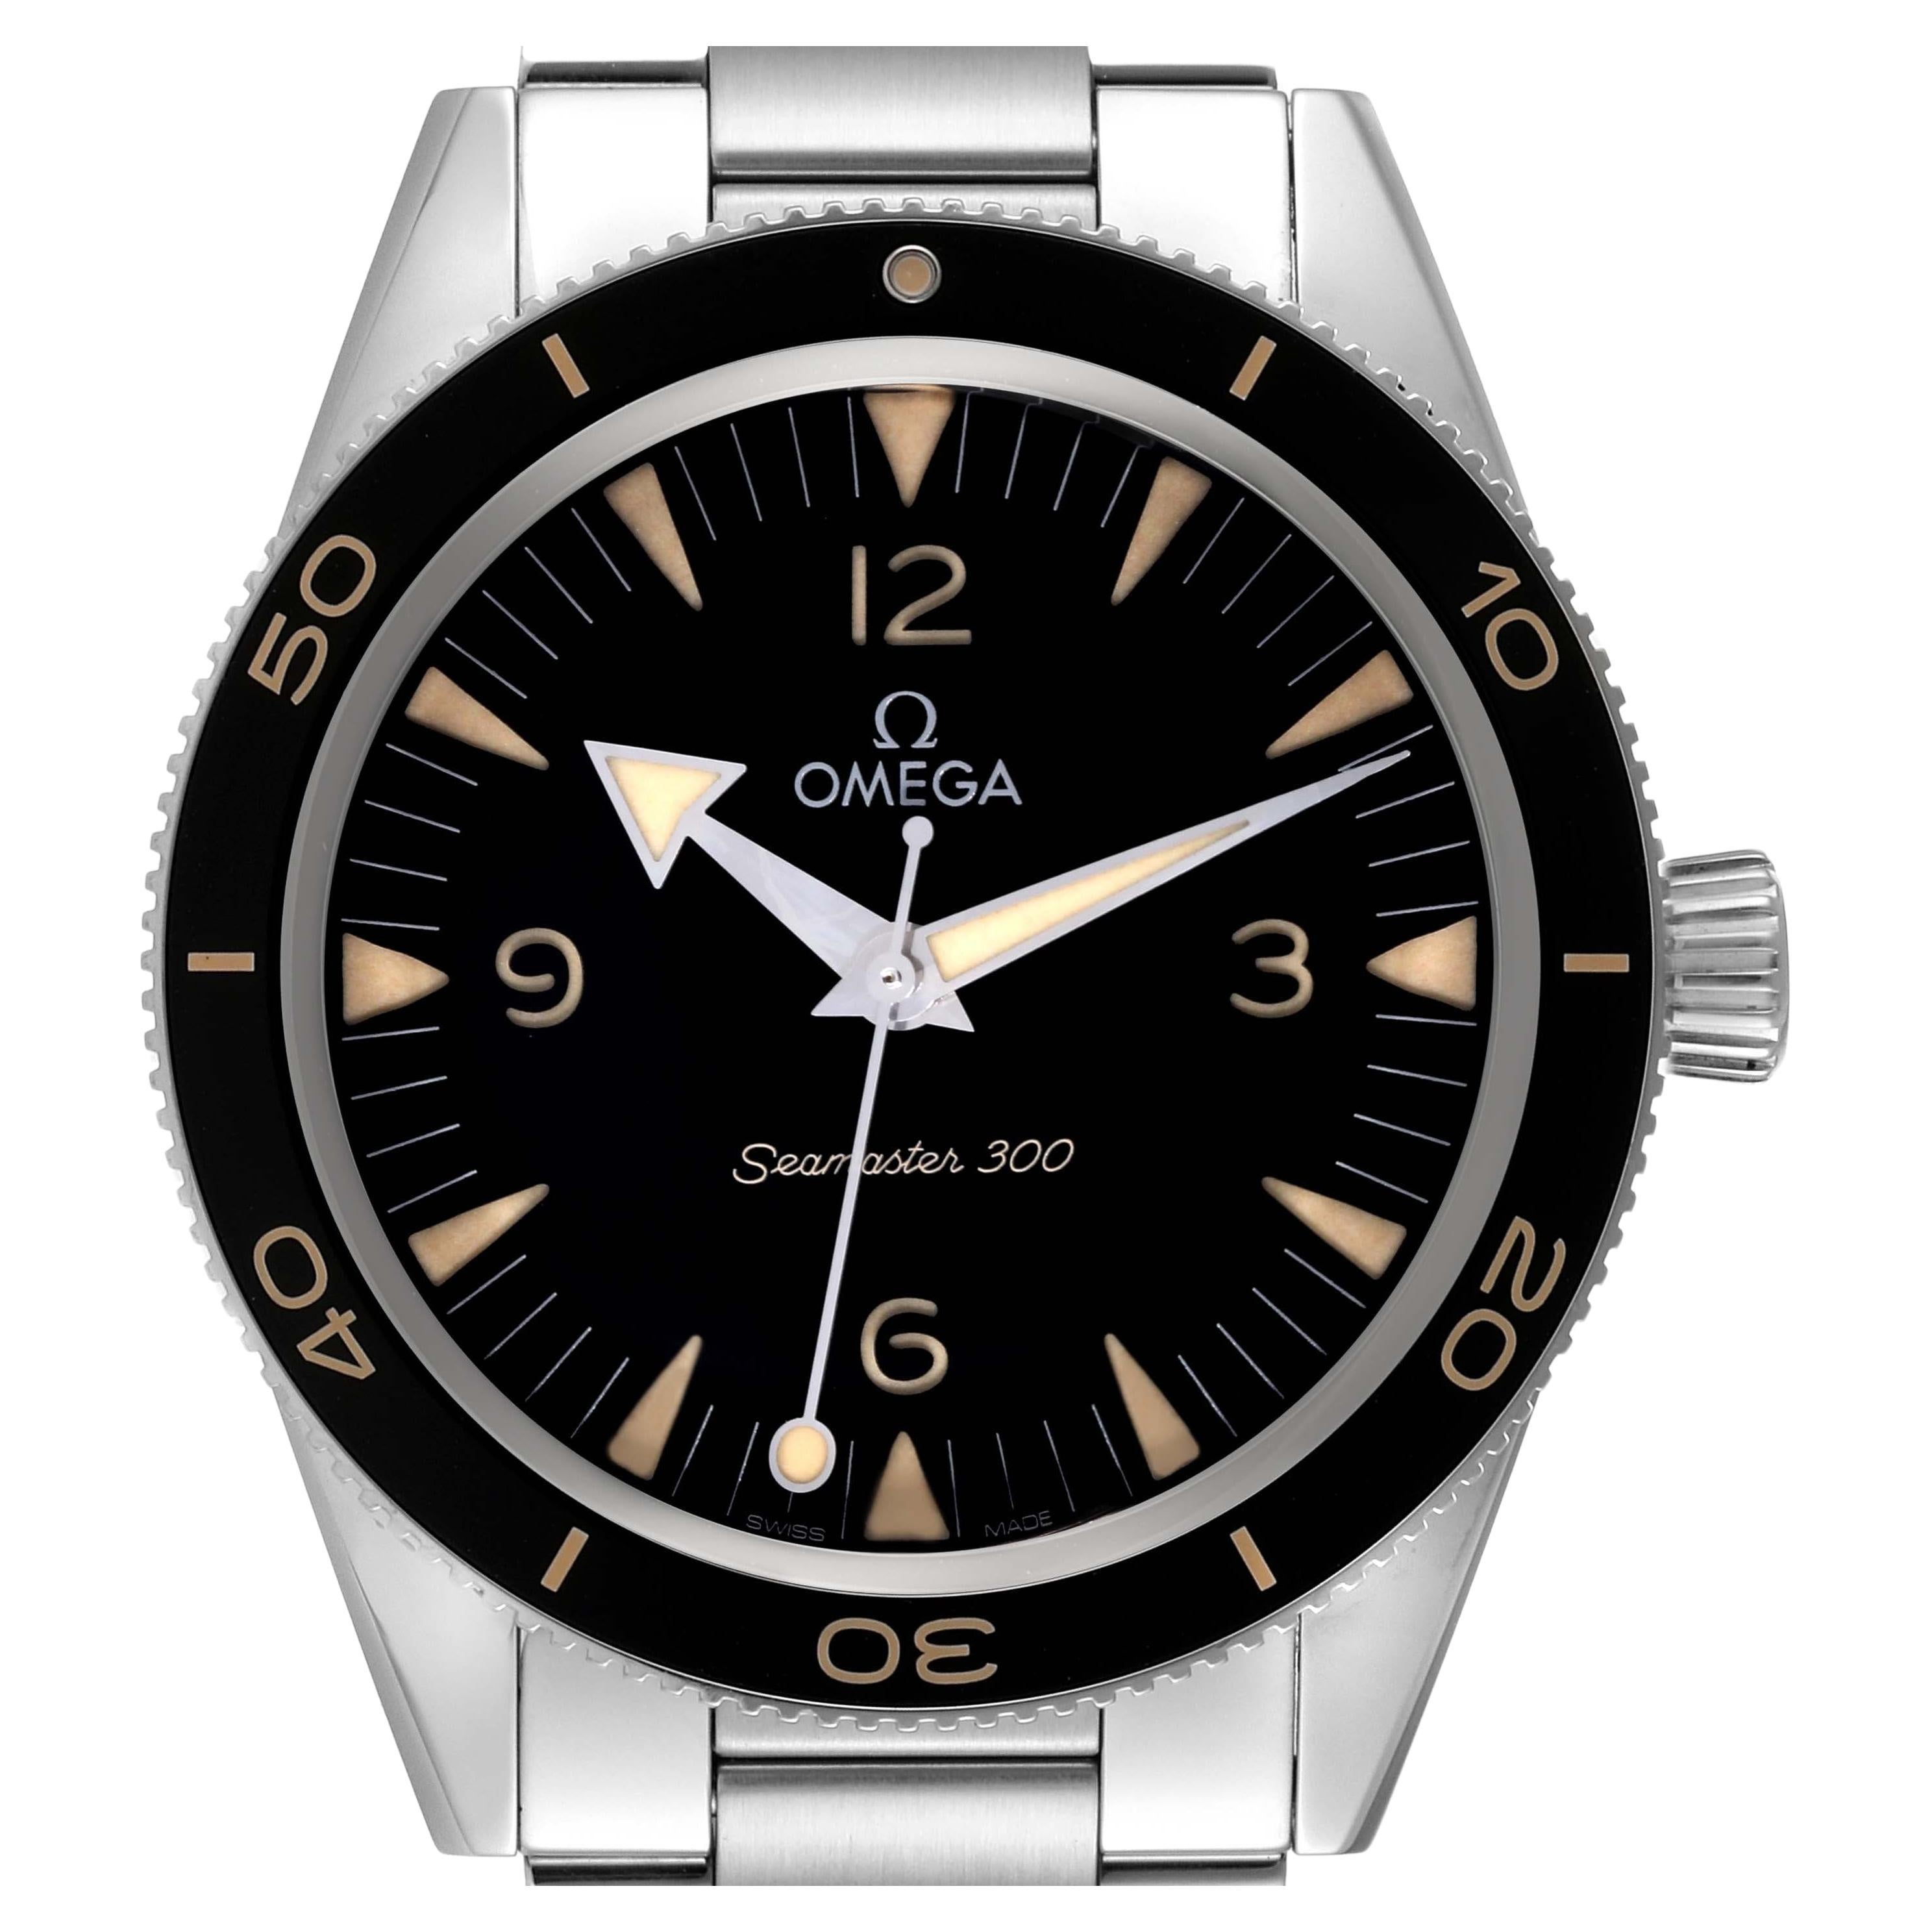 Omega Seamaster 300 Co-Axial Steel Mens Watch 234.30.41.21.01.001 Box Card